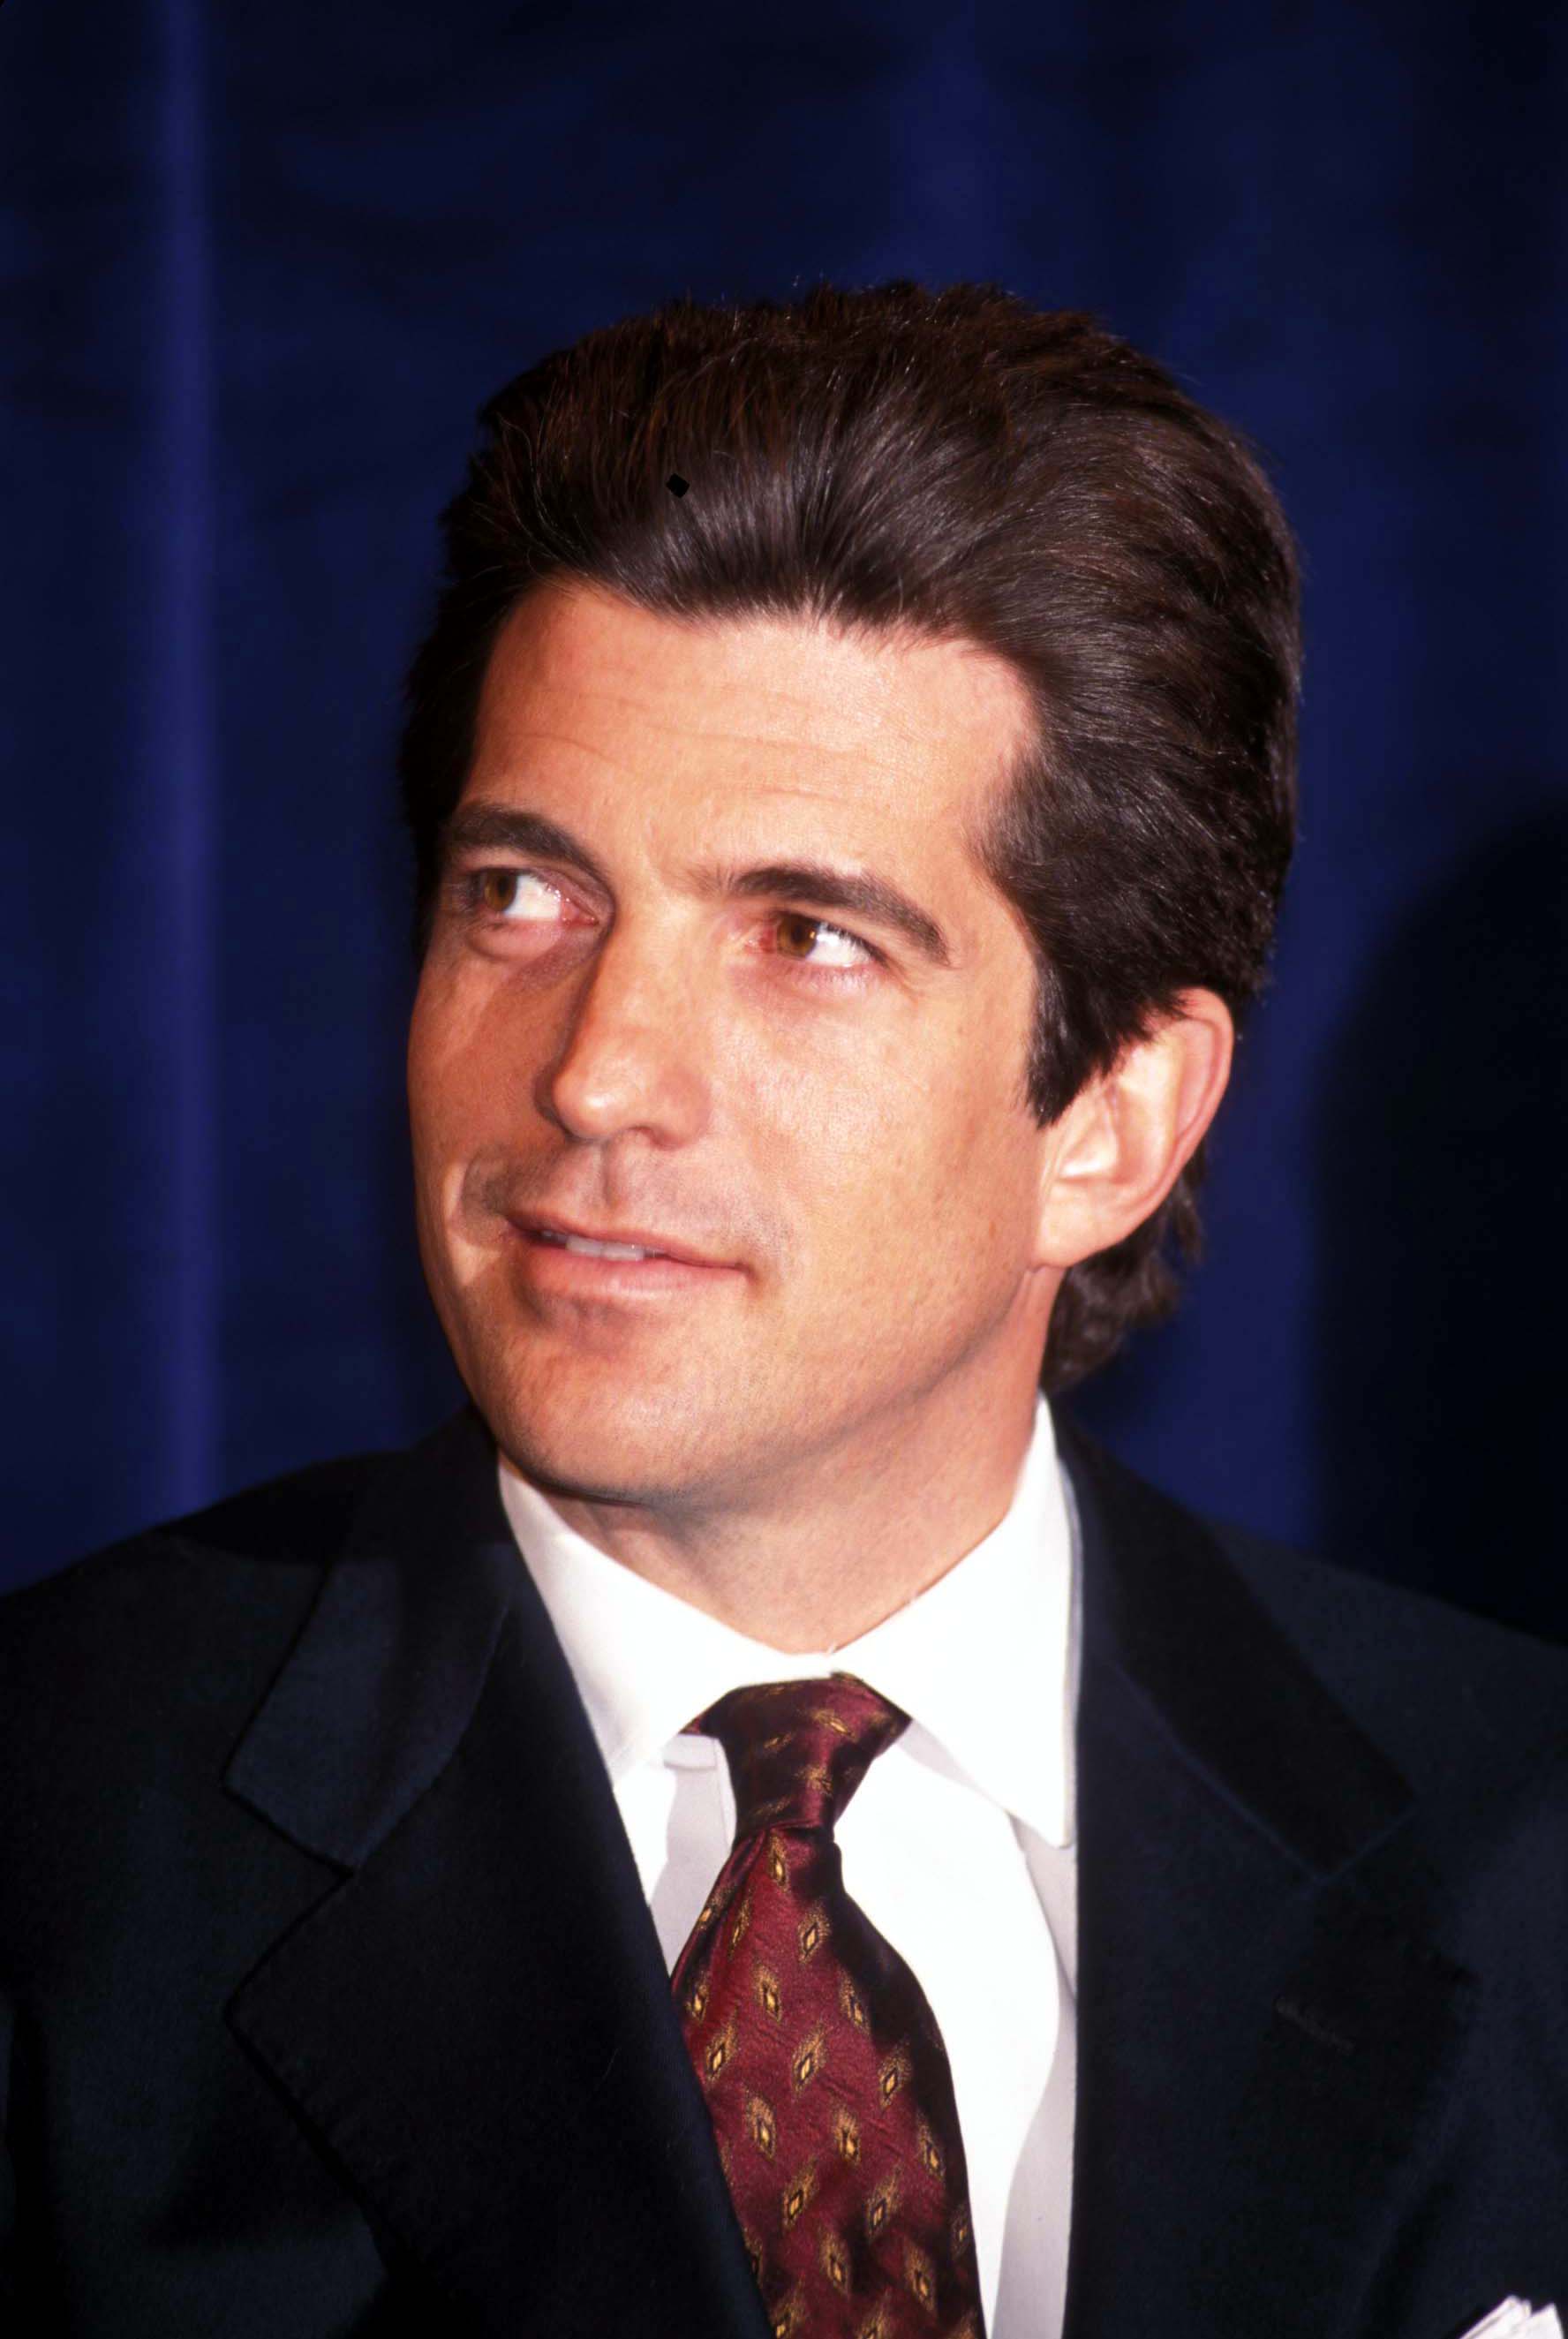 JFK Jr.'s Pilot Skills and Recklessness May Have Caused Death